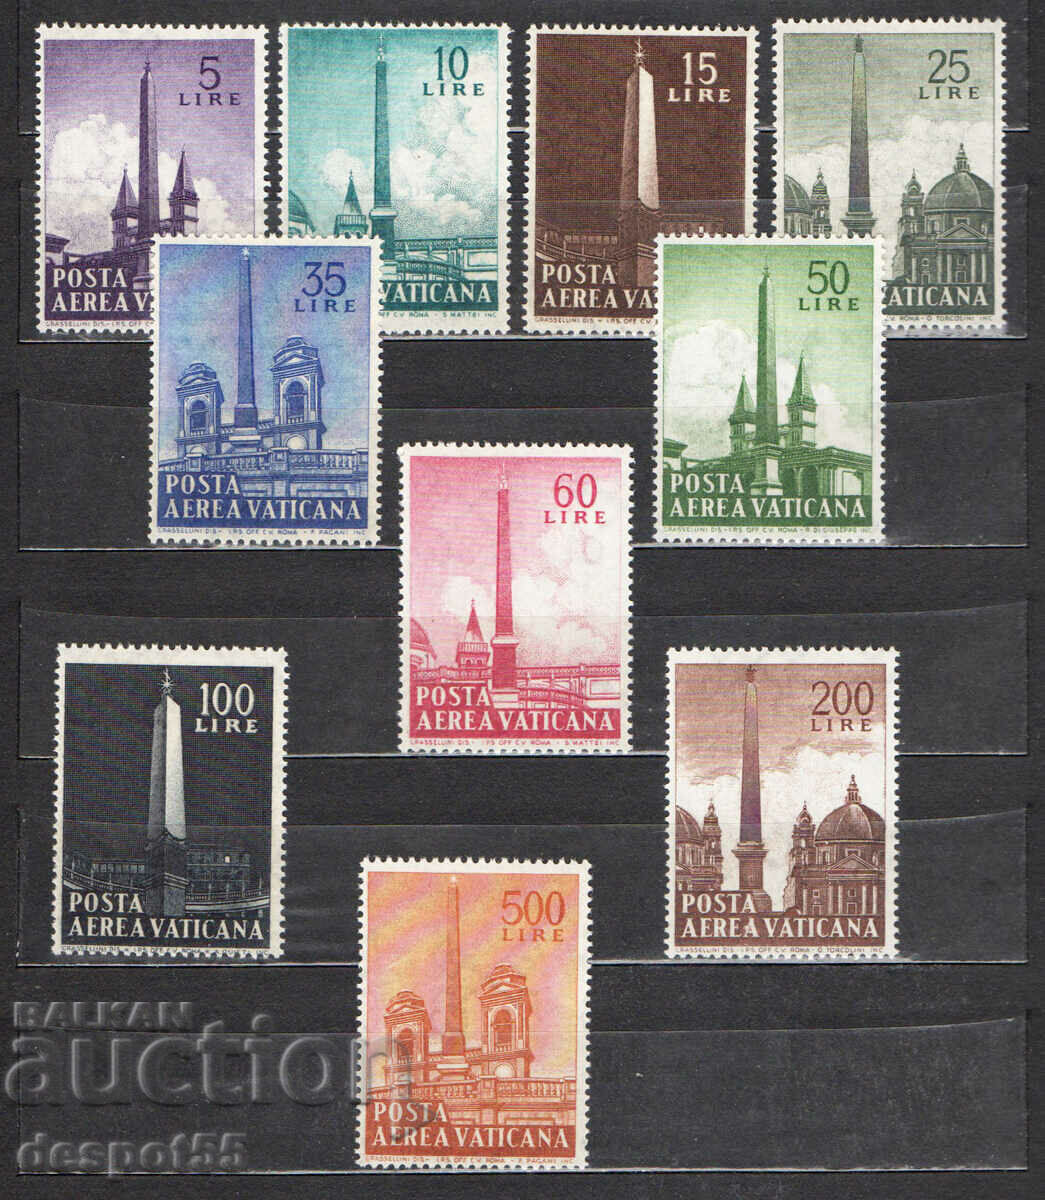 1959. The Vatican. Airmail - Monuments.